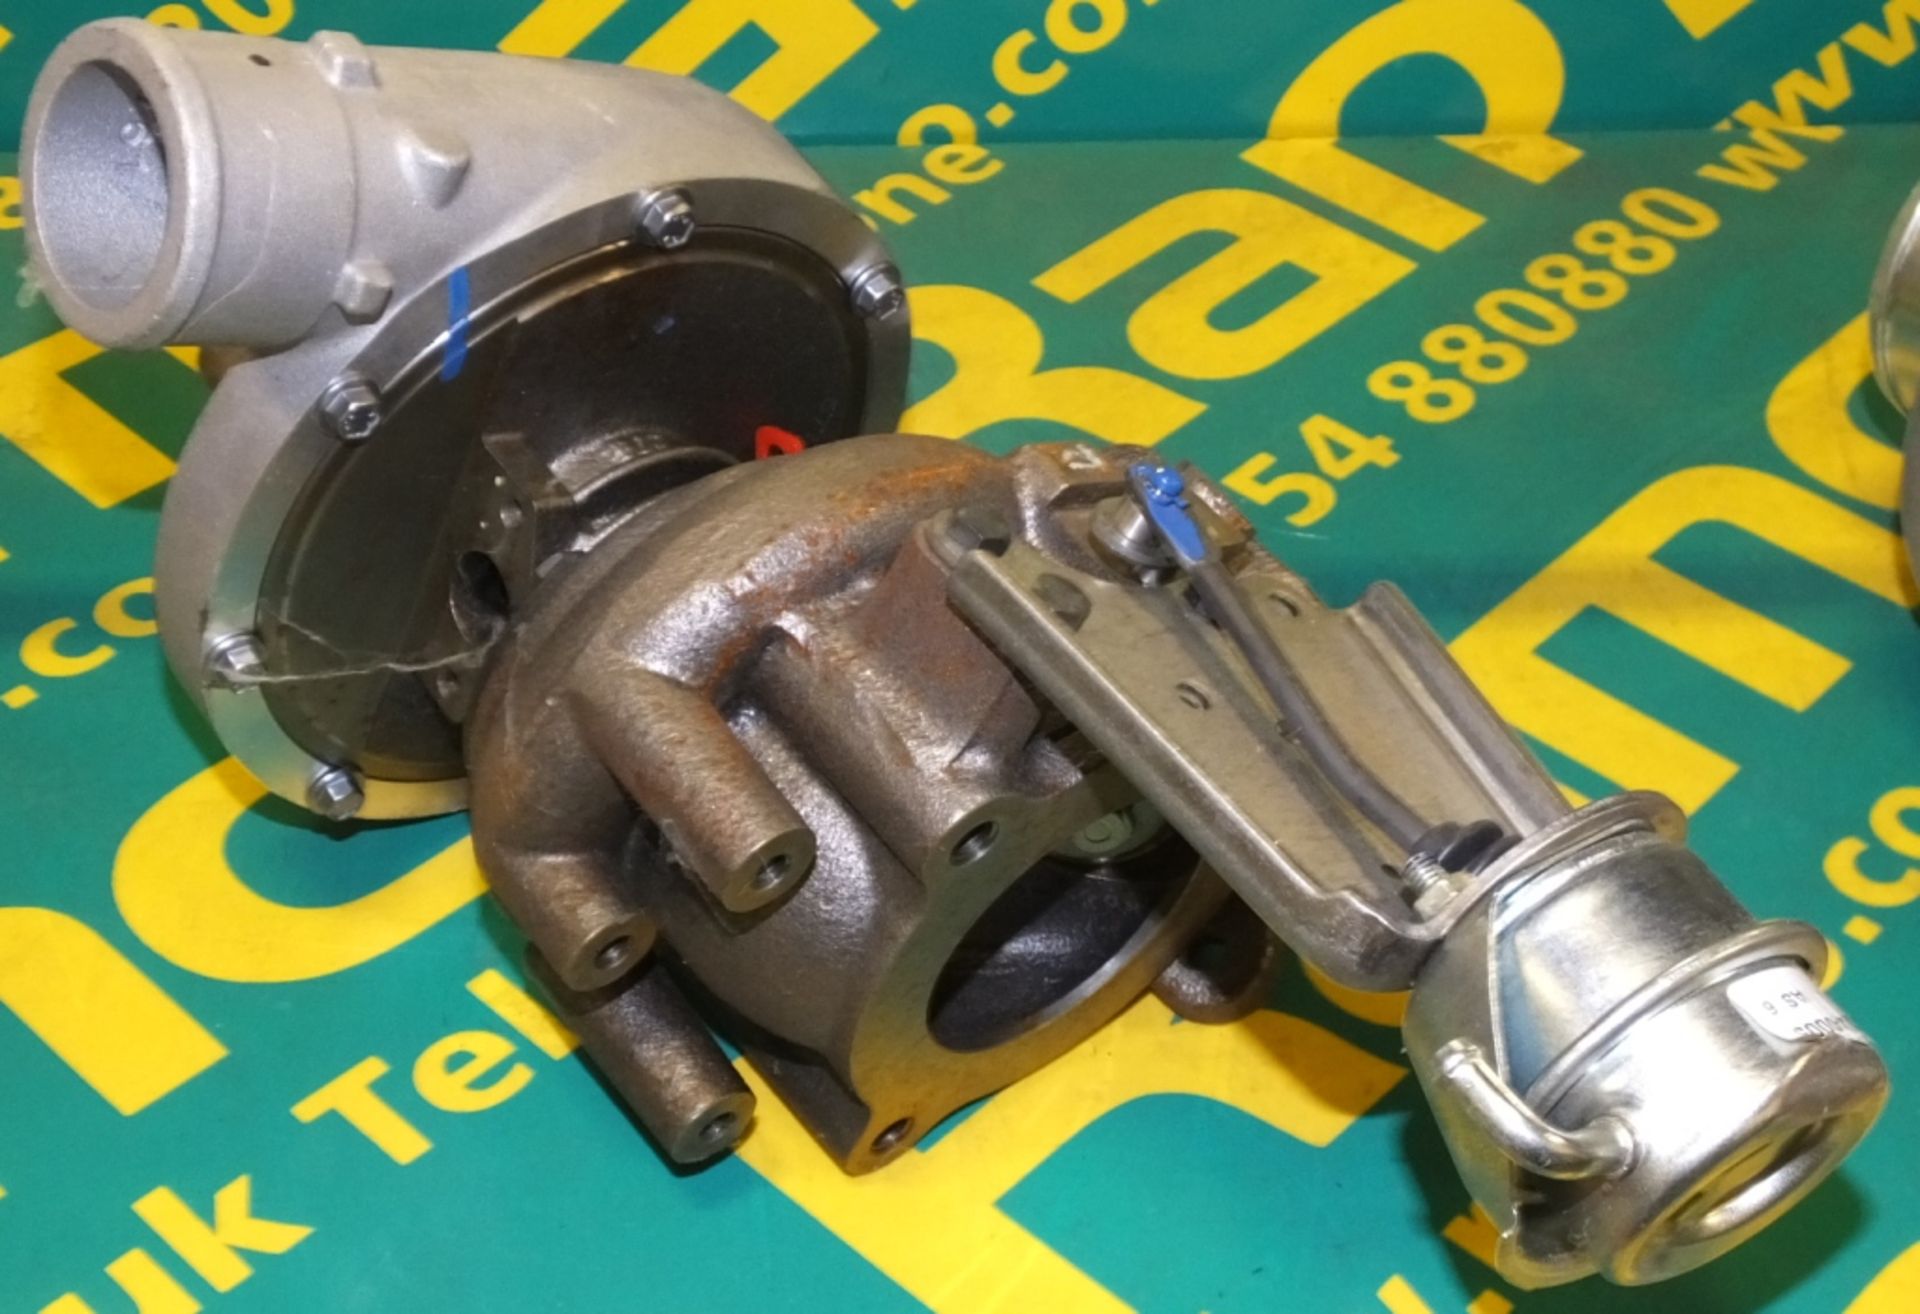 Perkins 6 cylinder turbo assembly type 1106